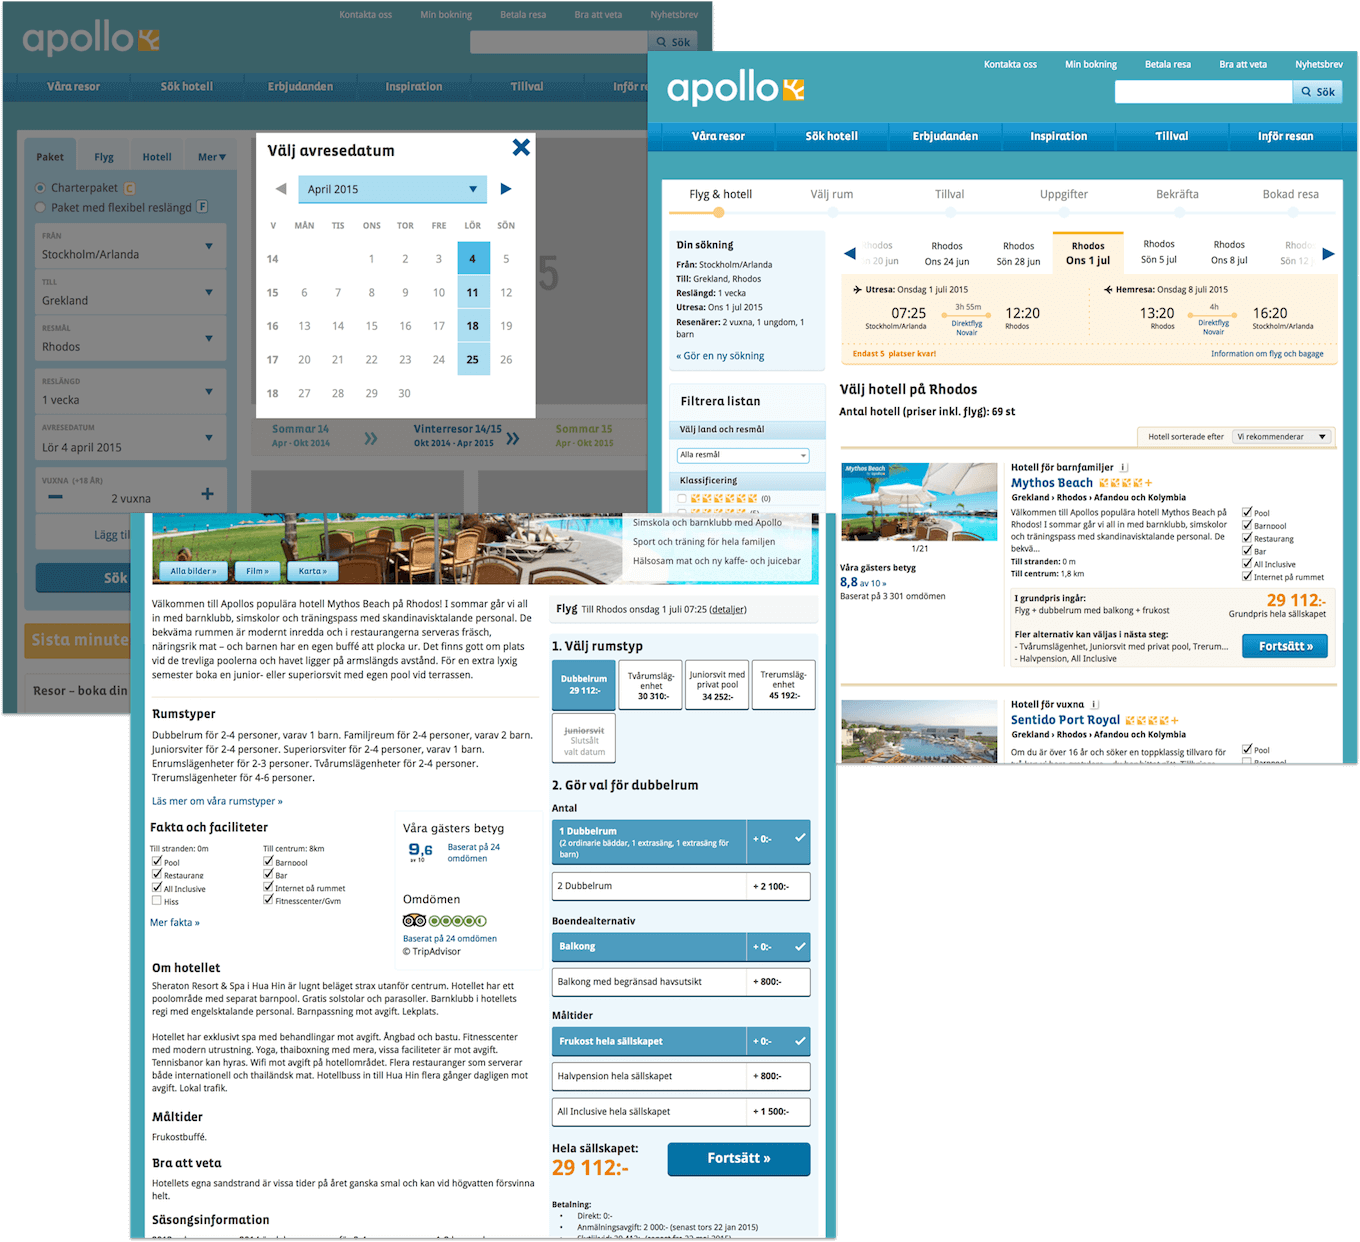 Different examples of the new booking flow viewed on a large screen